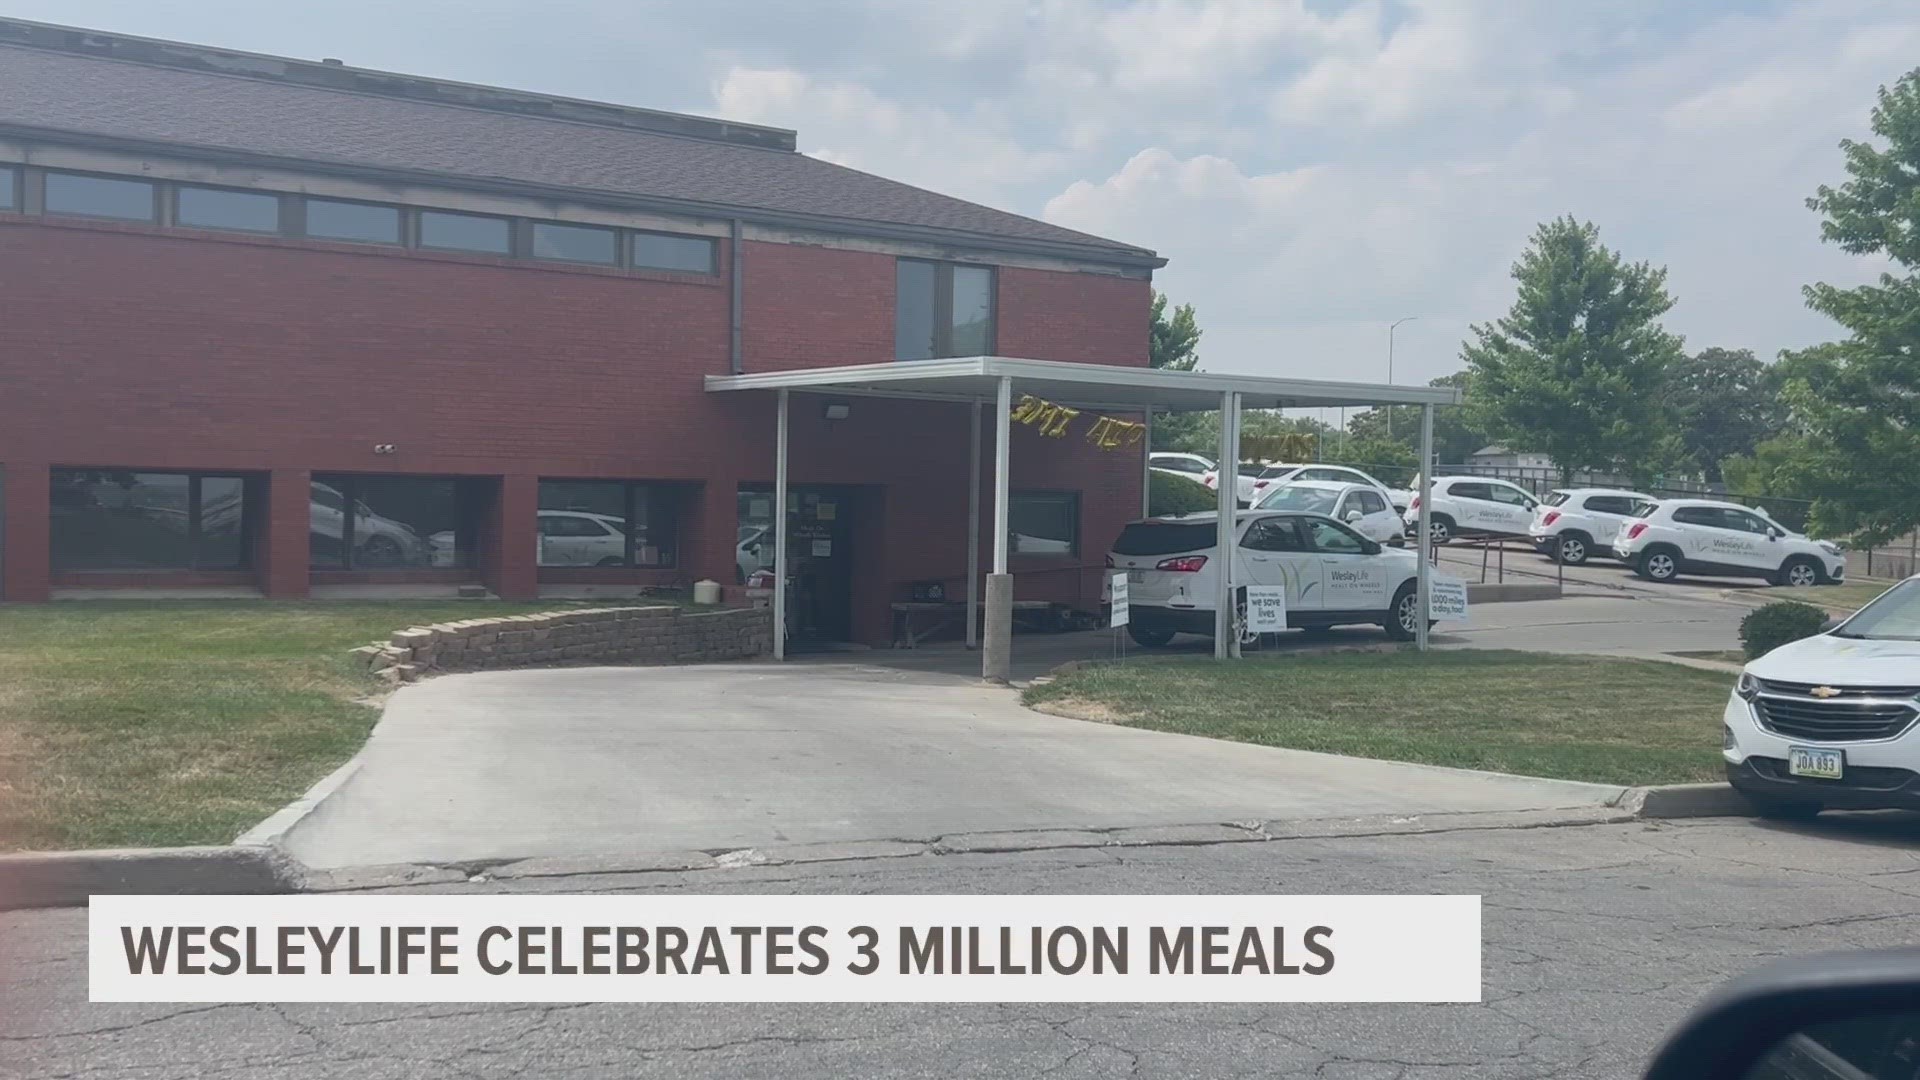 WesleyLife started tracking the number of meals they serve across the Des Moines metro back in 2010.